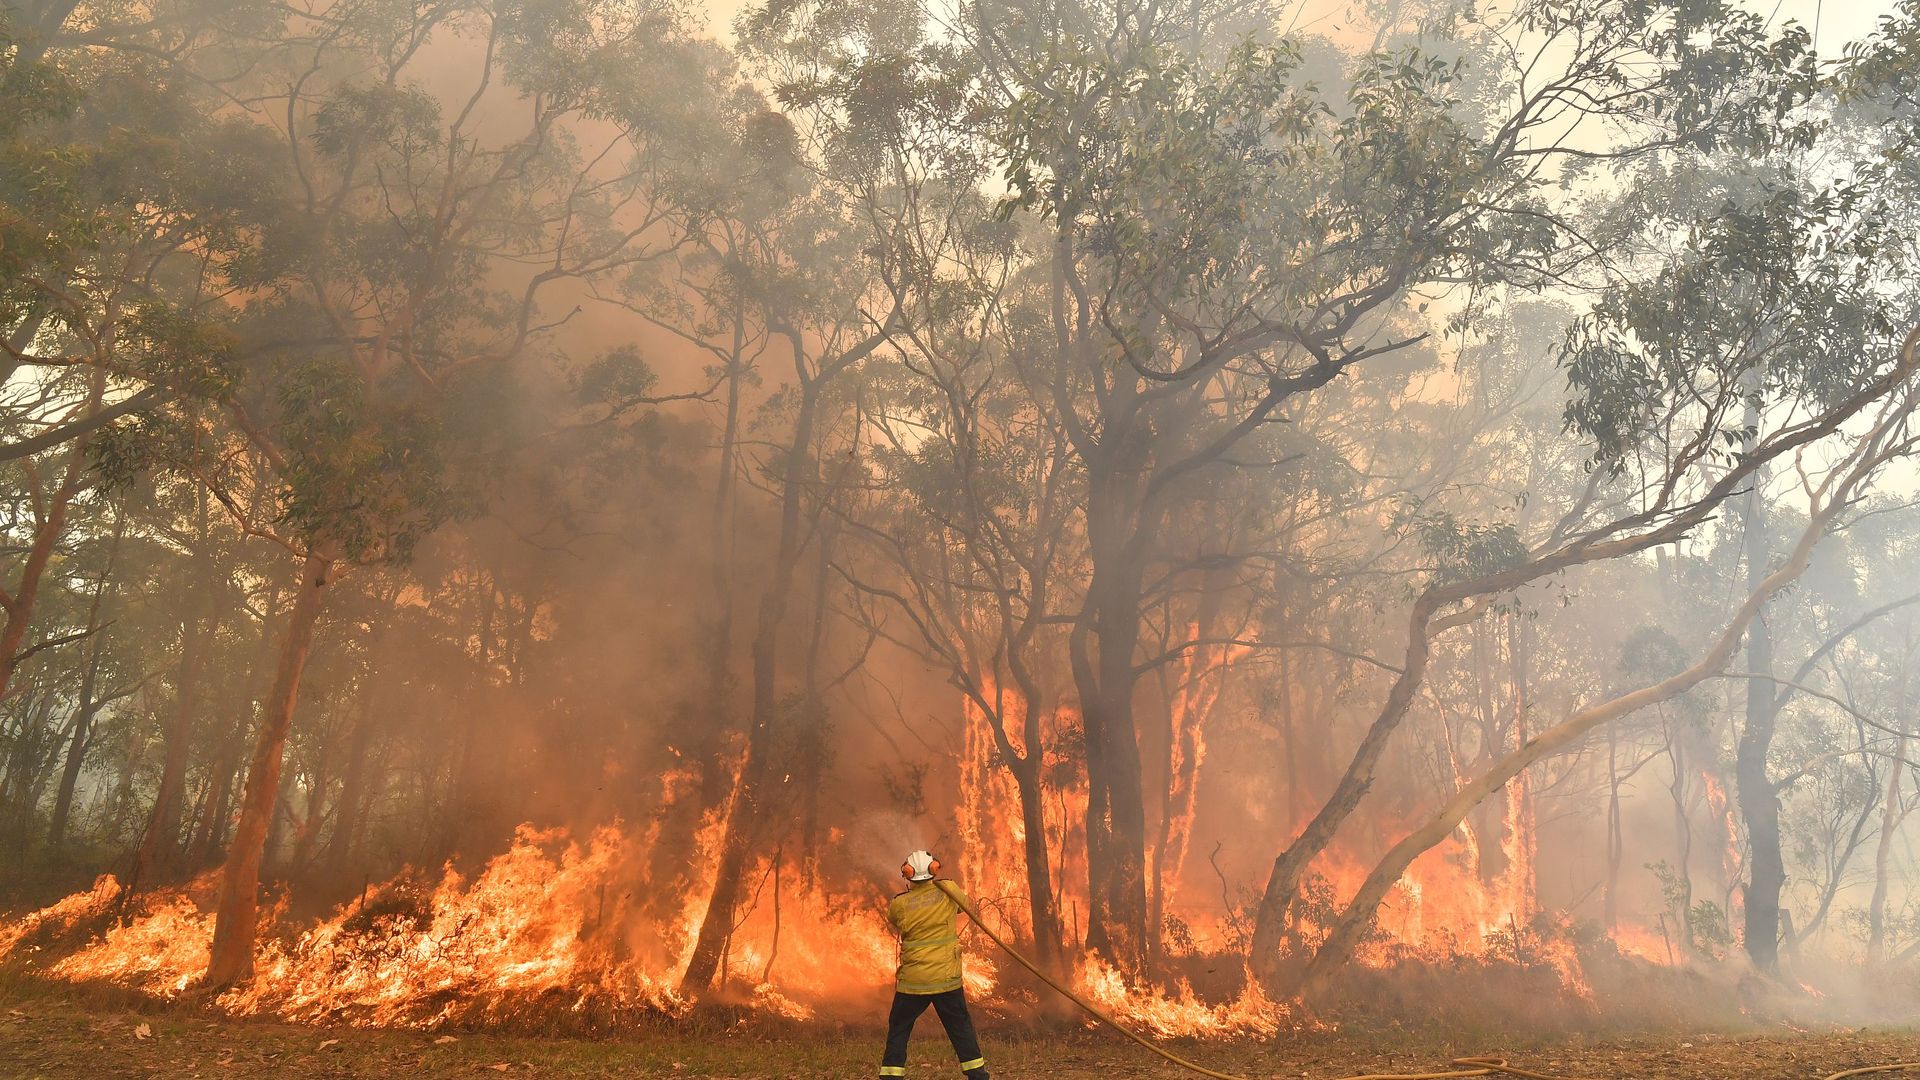 This photo taken on December 10, 2019 shows a firefighter conducting back-burning measures to secure residential areas from encroaching bushfires in the Central Coast